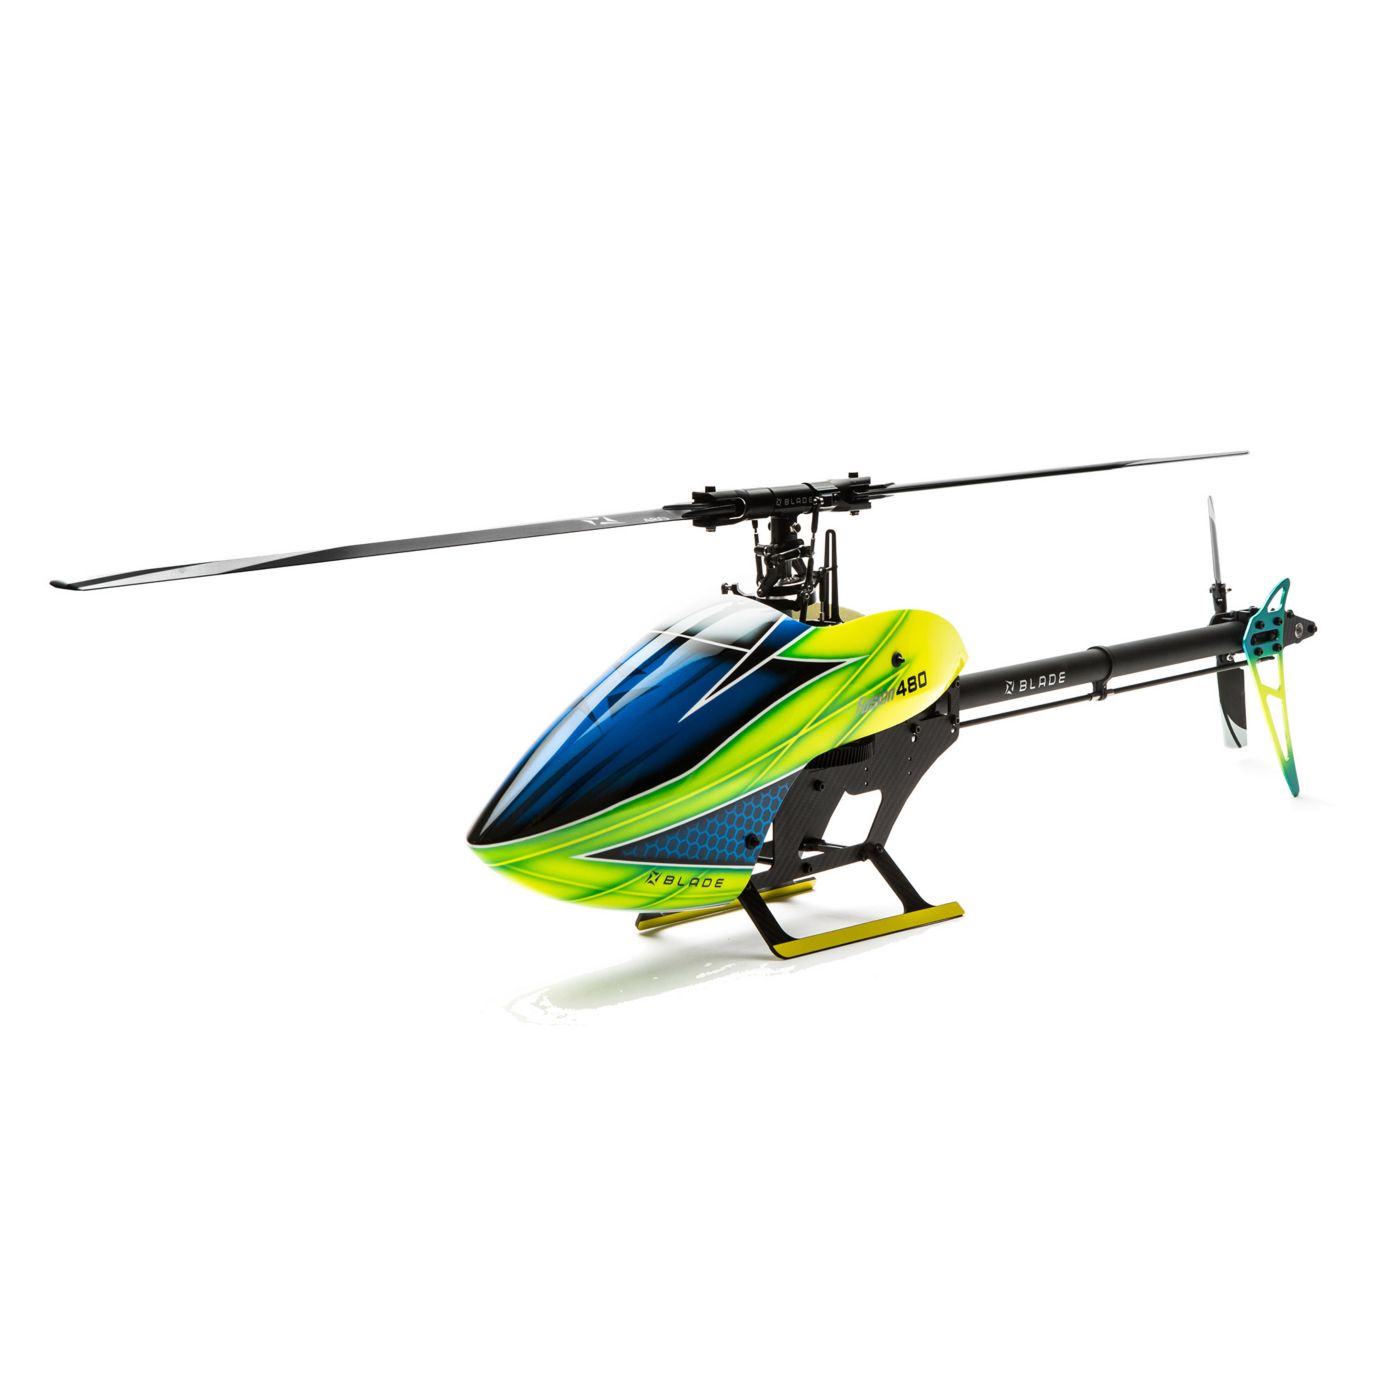 Blade Fusion 480 Helicopter Kit